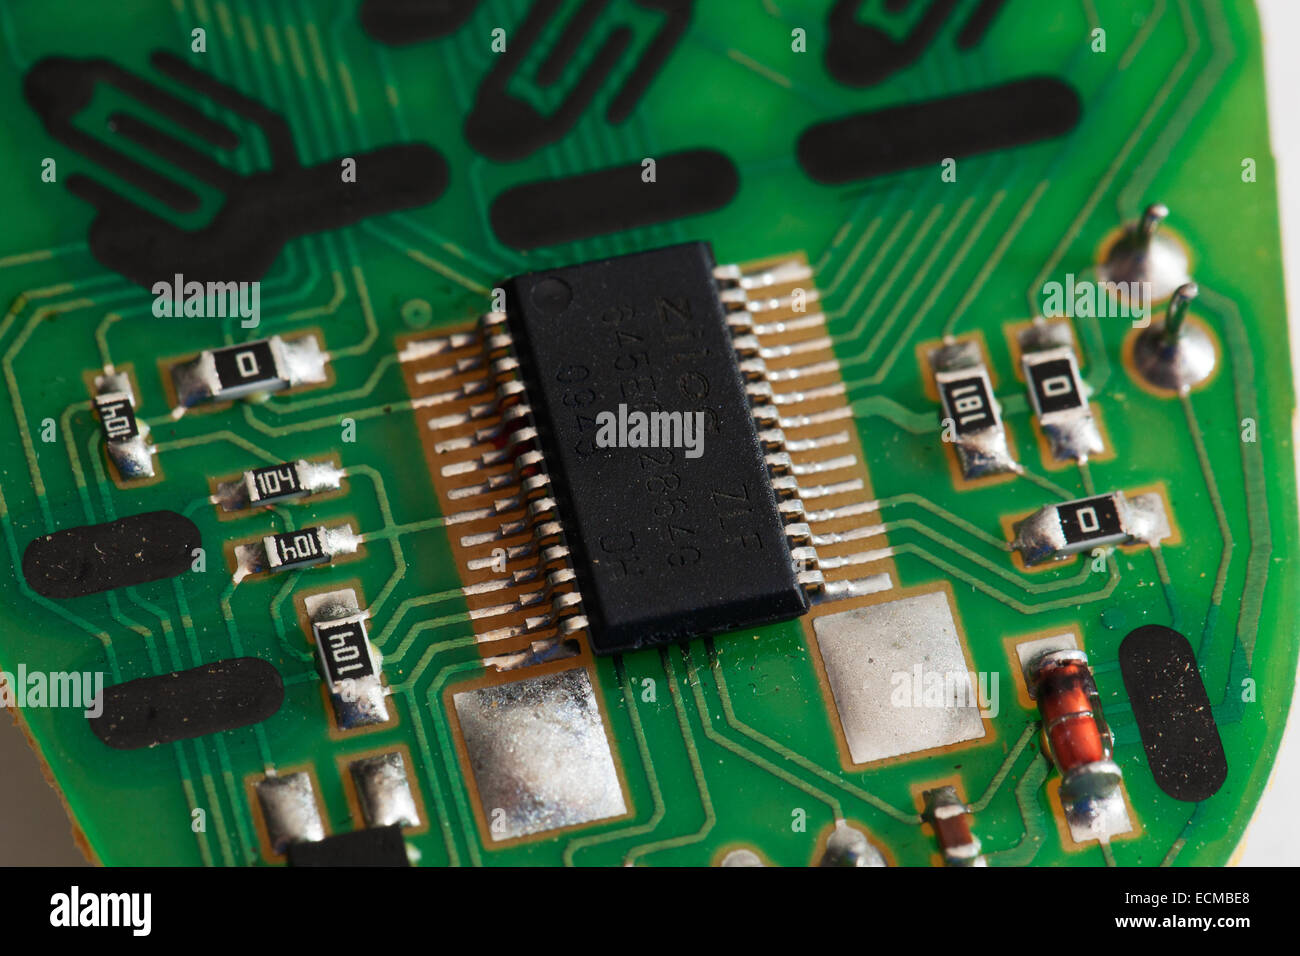 Microchip Connections of a Remote on a green PBC circuit board Stock Photo